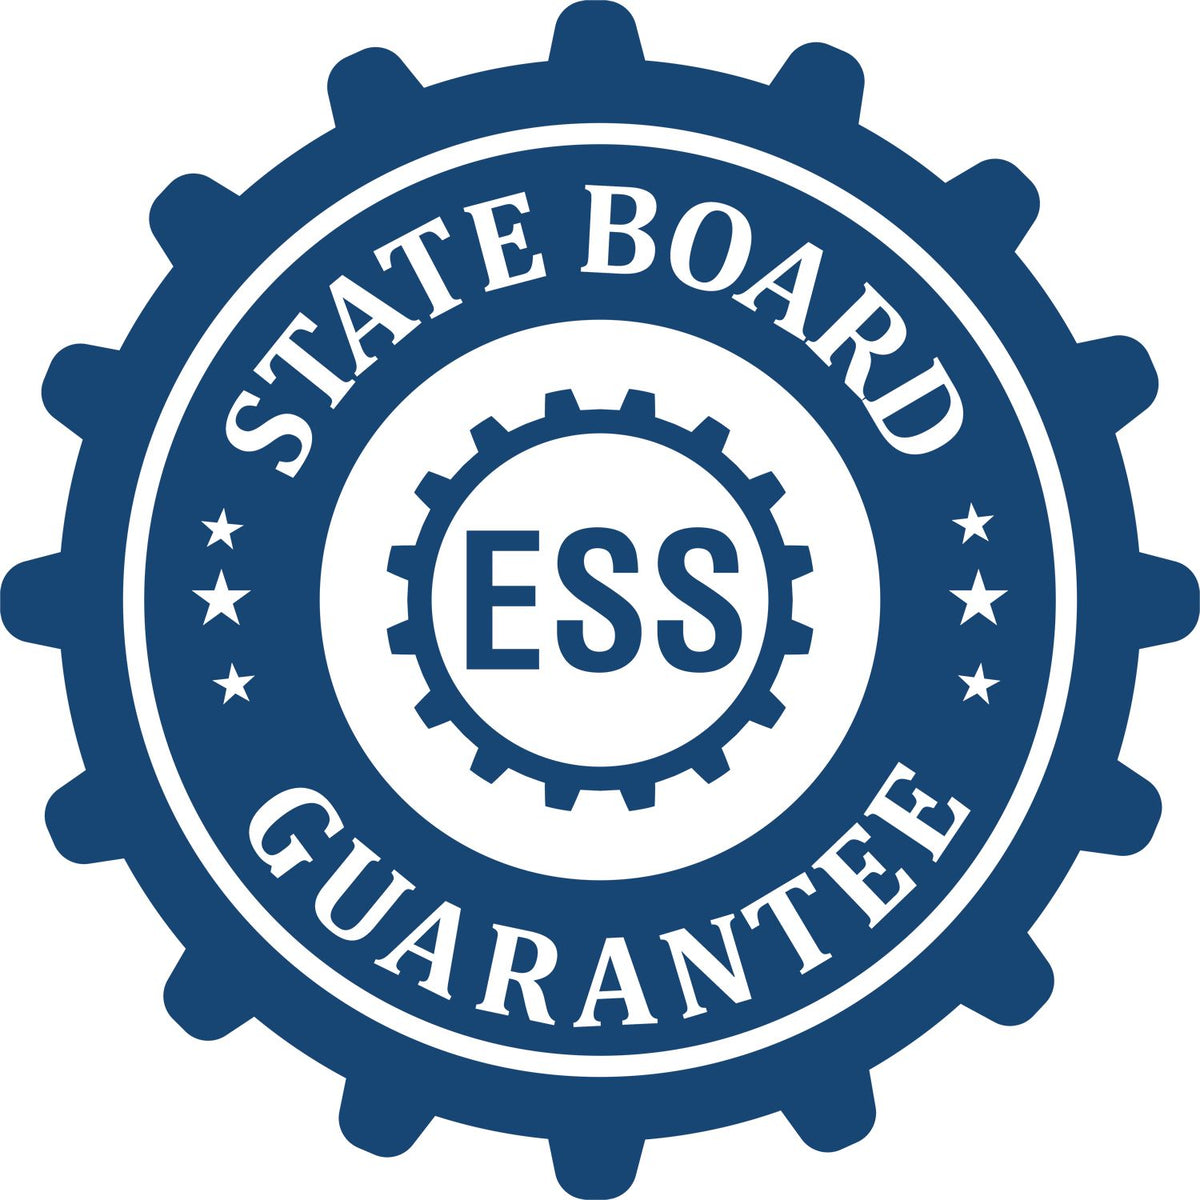 An emblem in a gear shape illustrating a state board guarantee for the Vermont Engineer Desk Seal product.